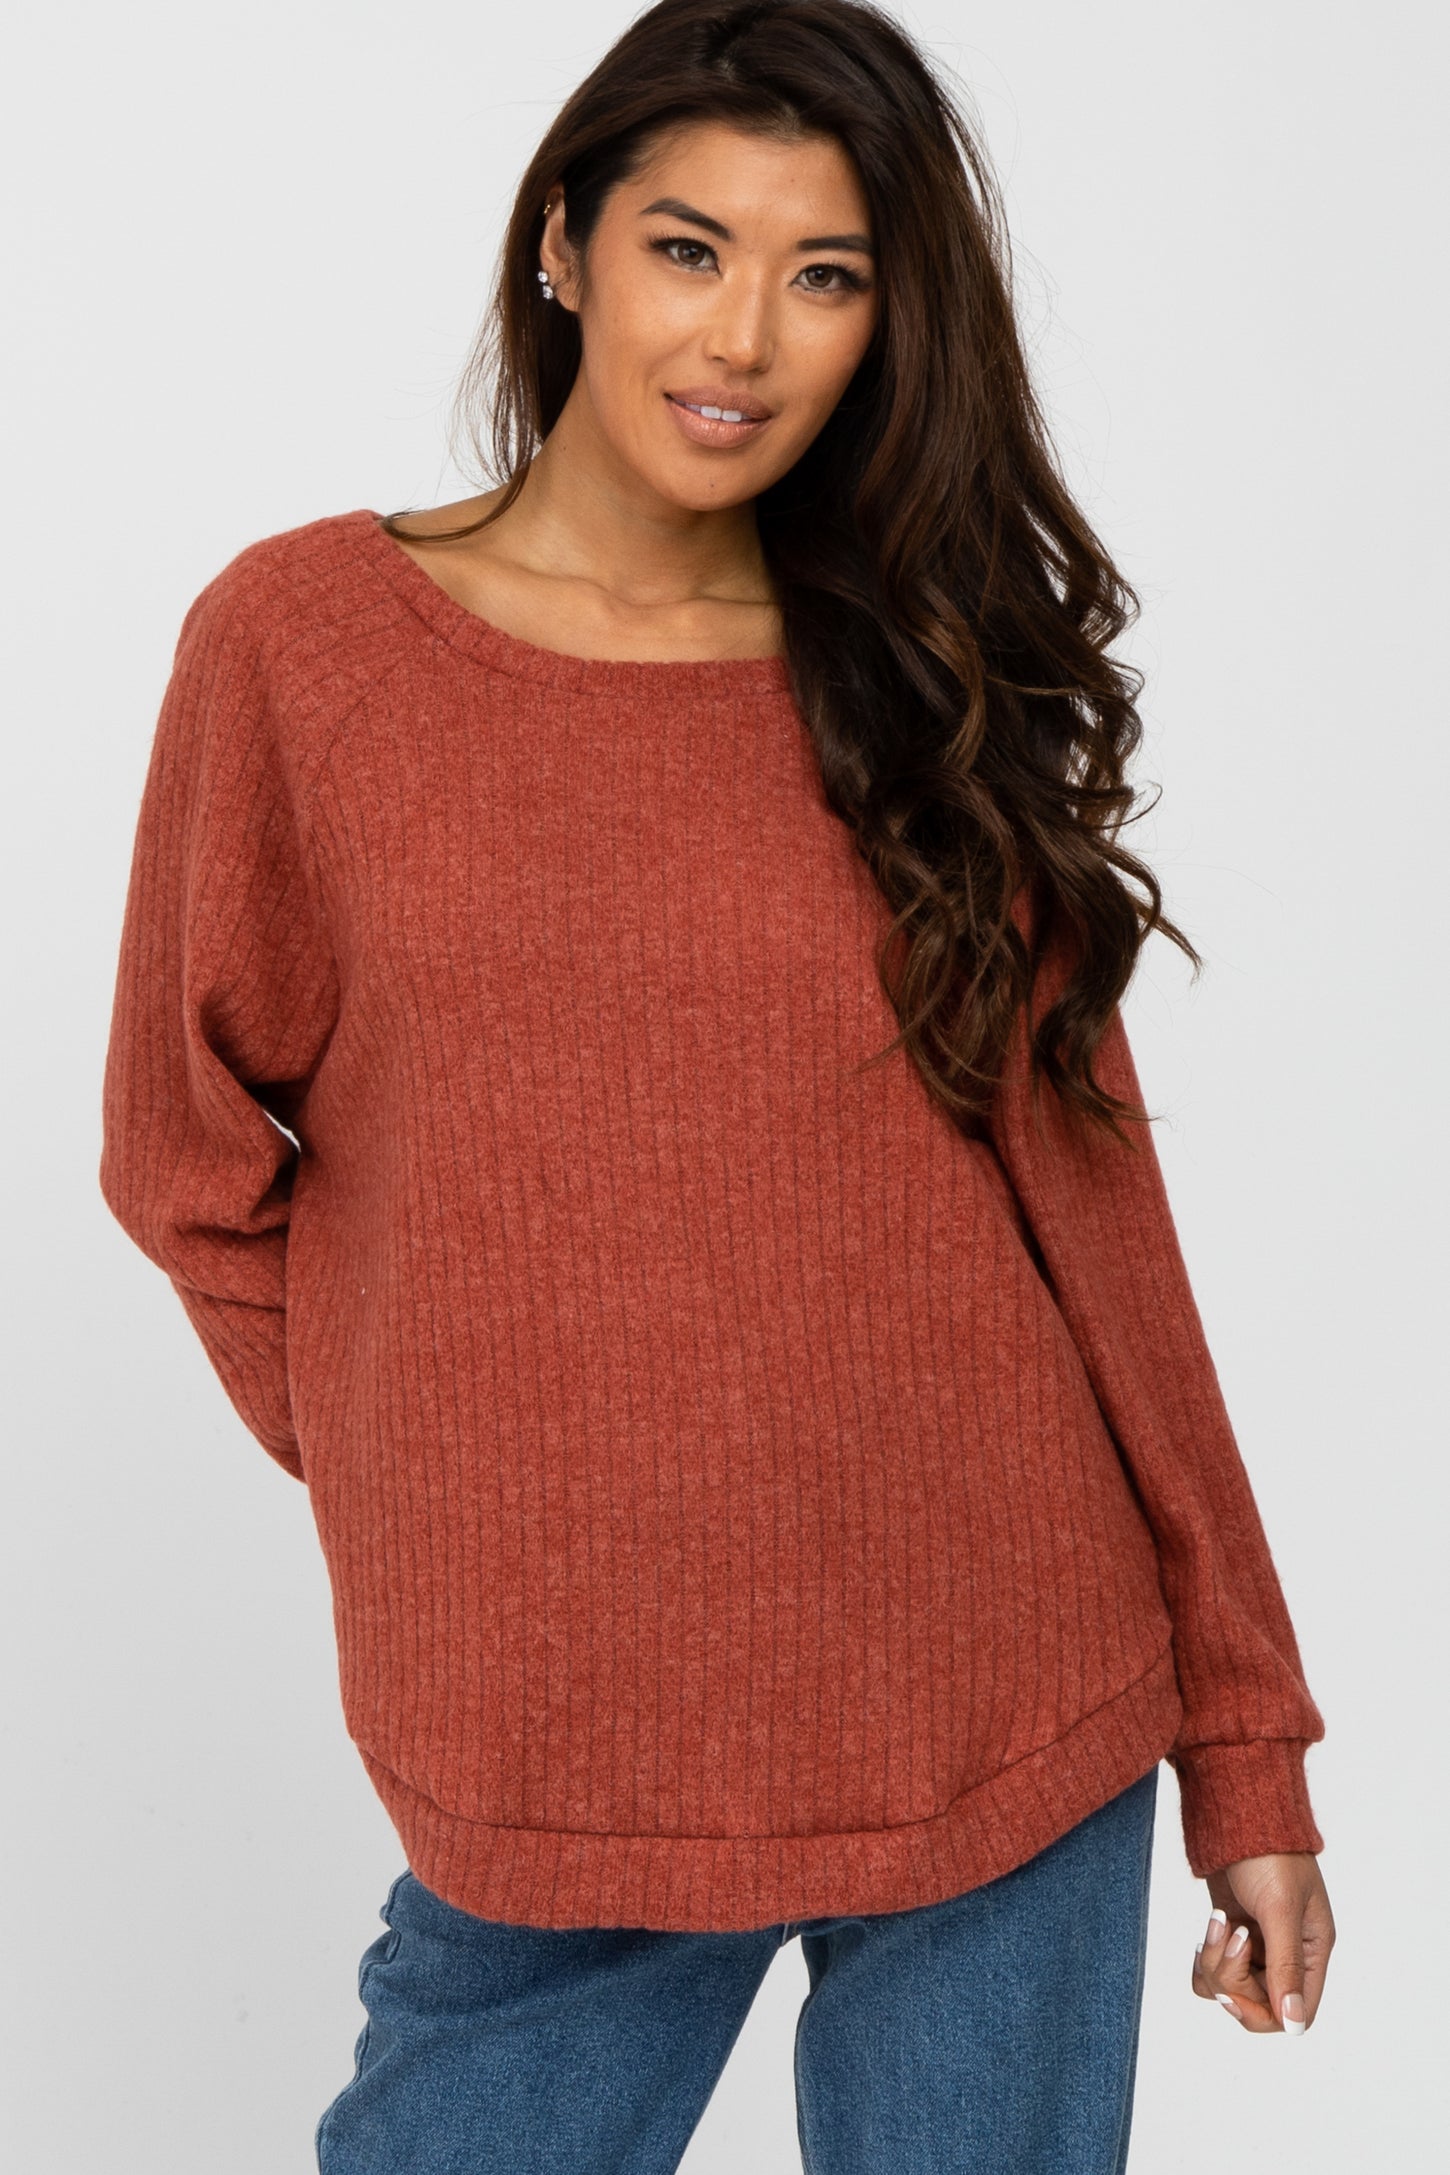 Rust Brushed Ribbed Long Sleeve Maternity Top